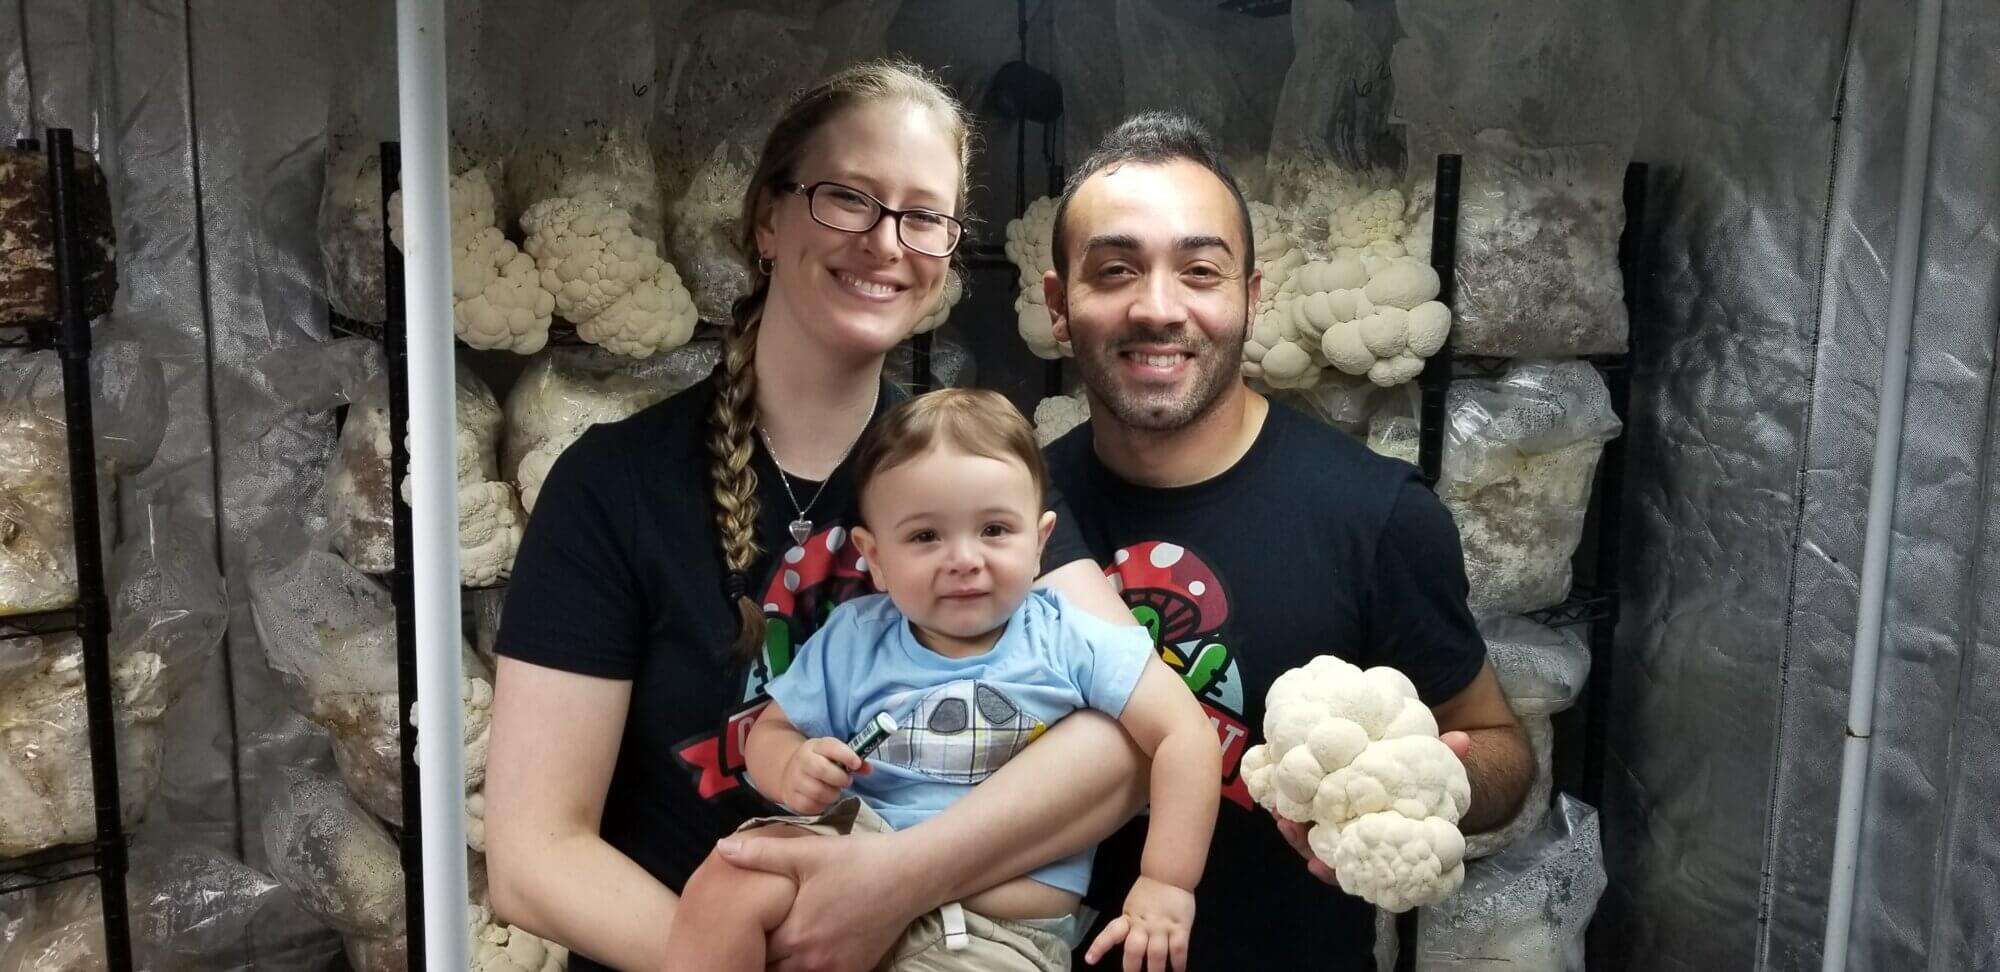 Joe with wife and son.